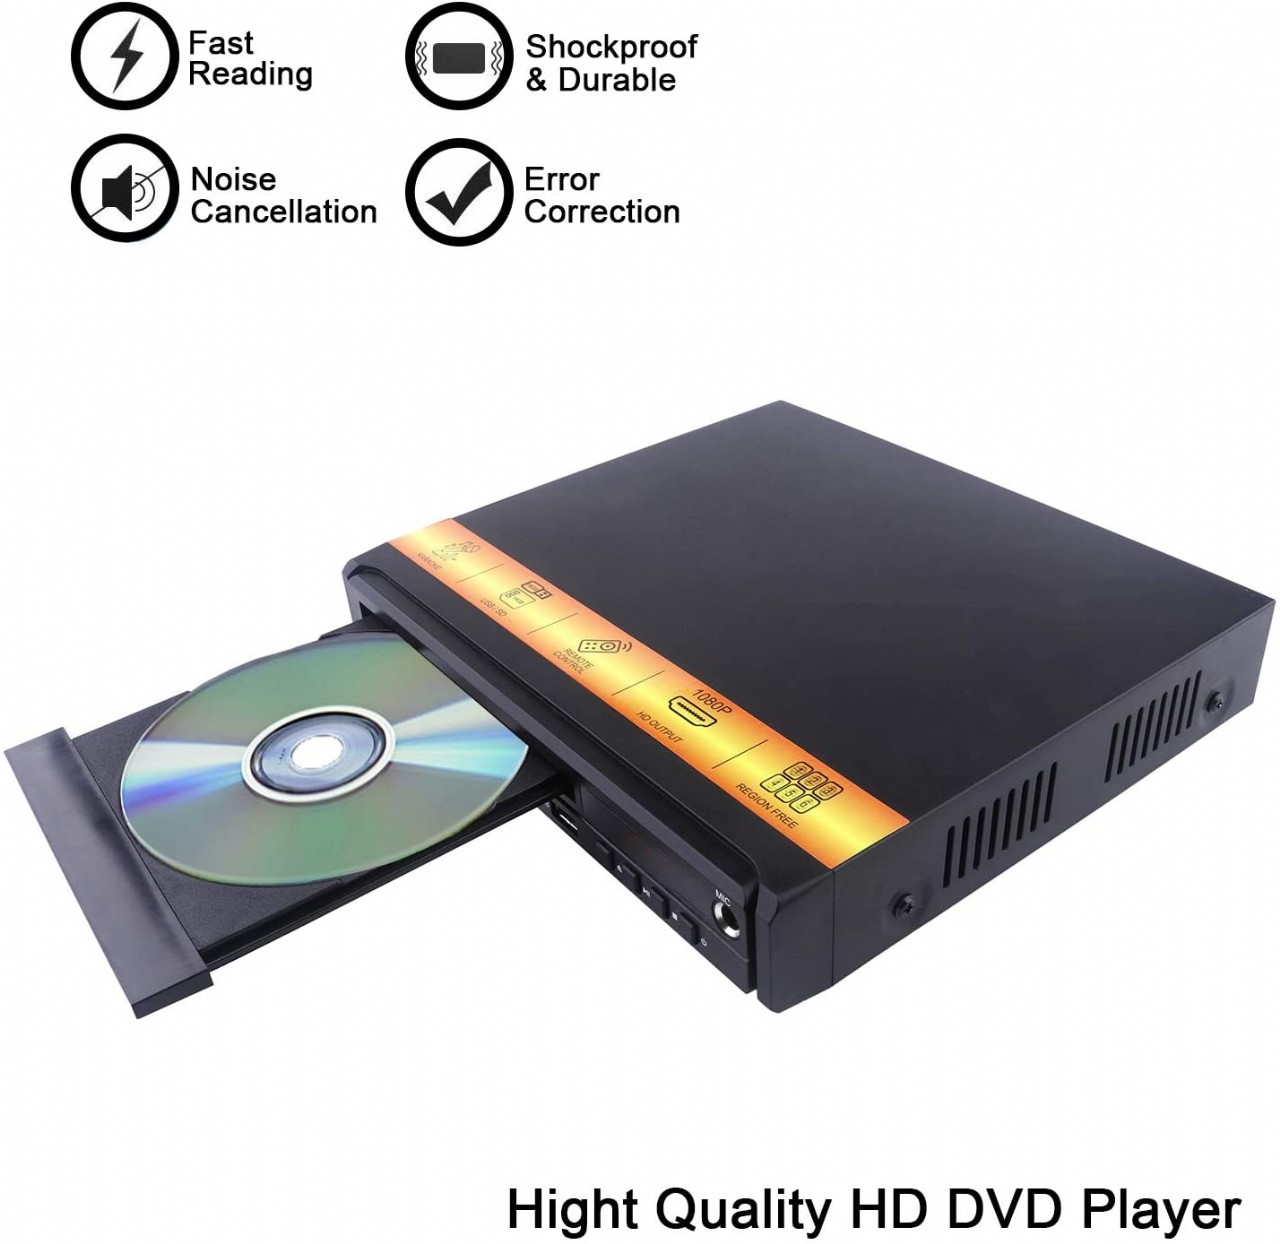 DVD Player, Home DVD Players for TV Region Free DVDs 1080p Full HD Compact CD/DVD Player